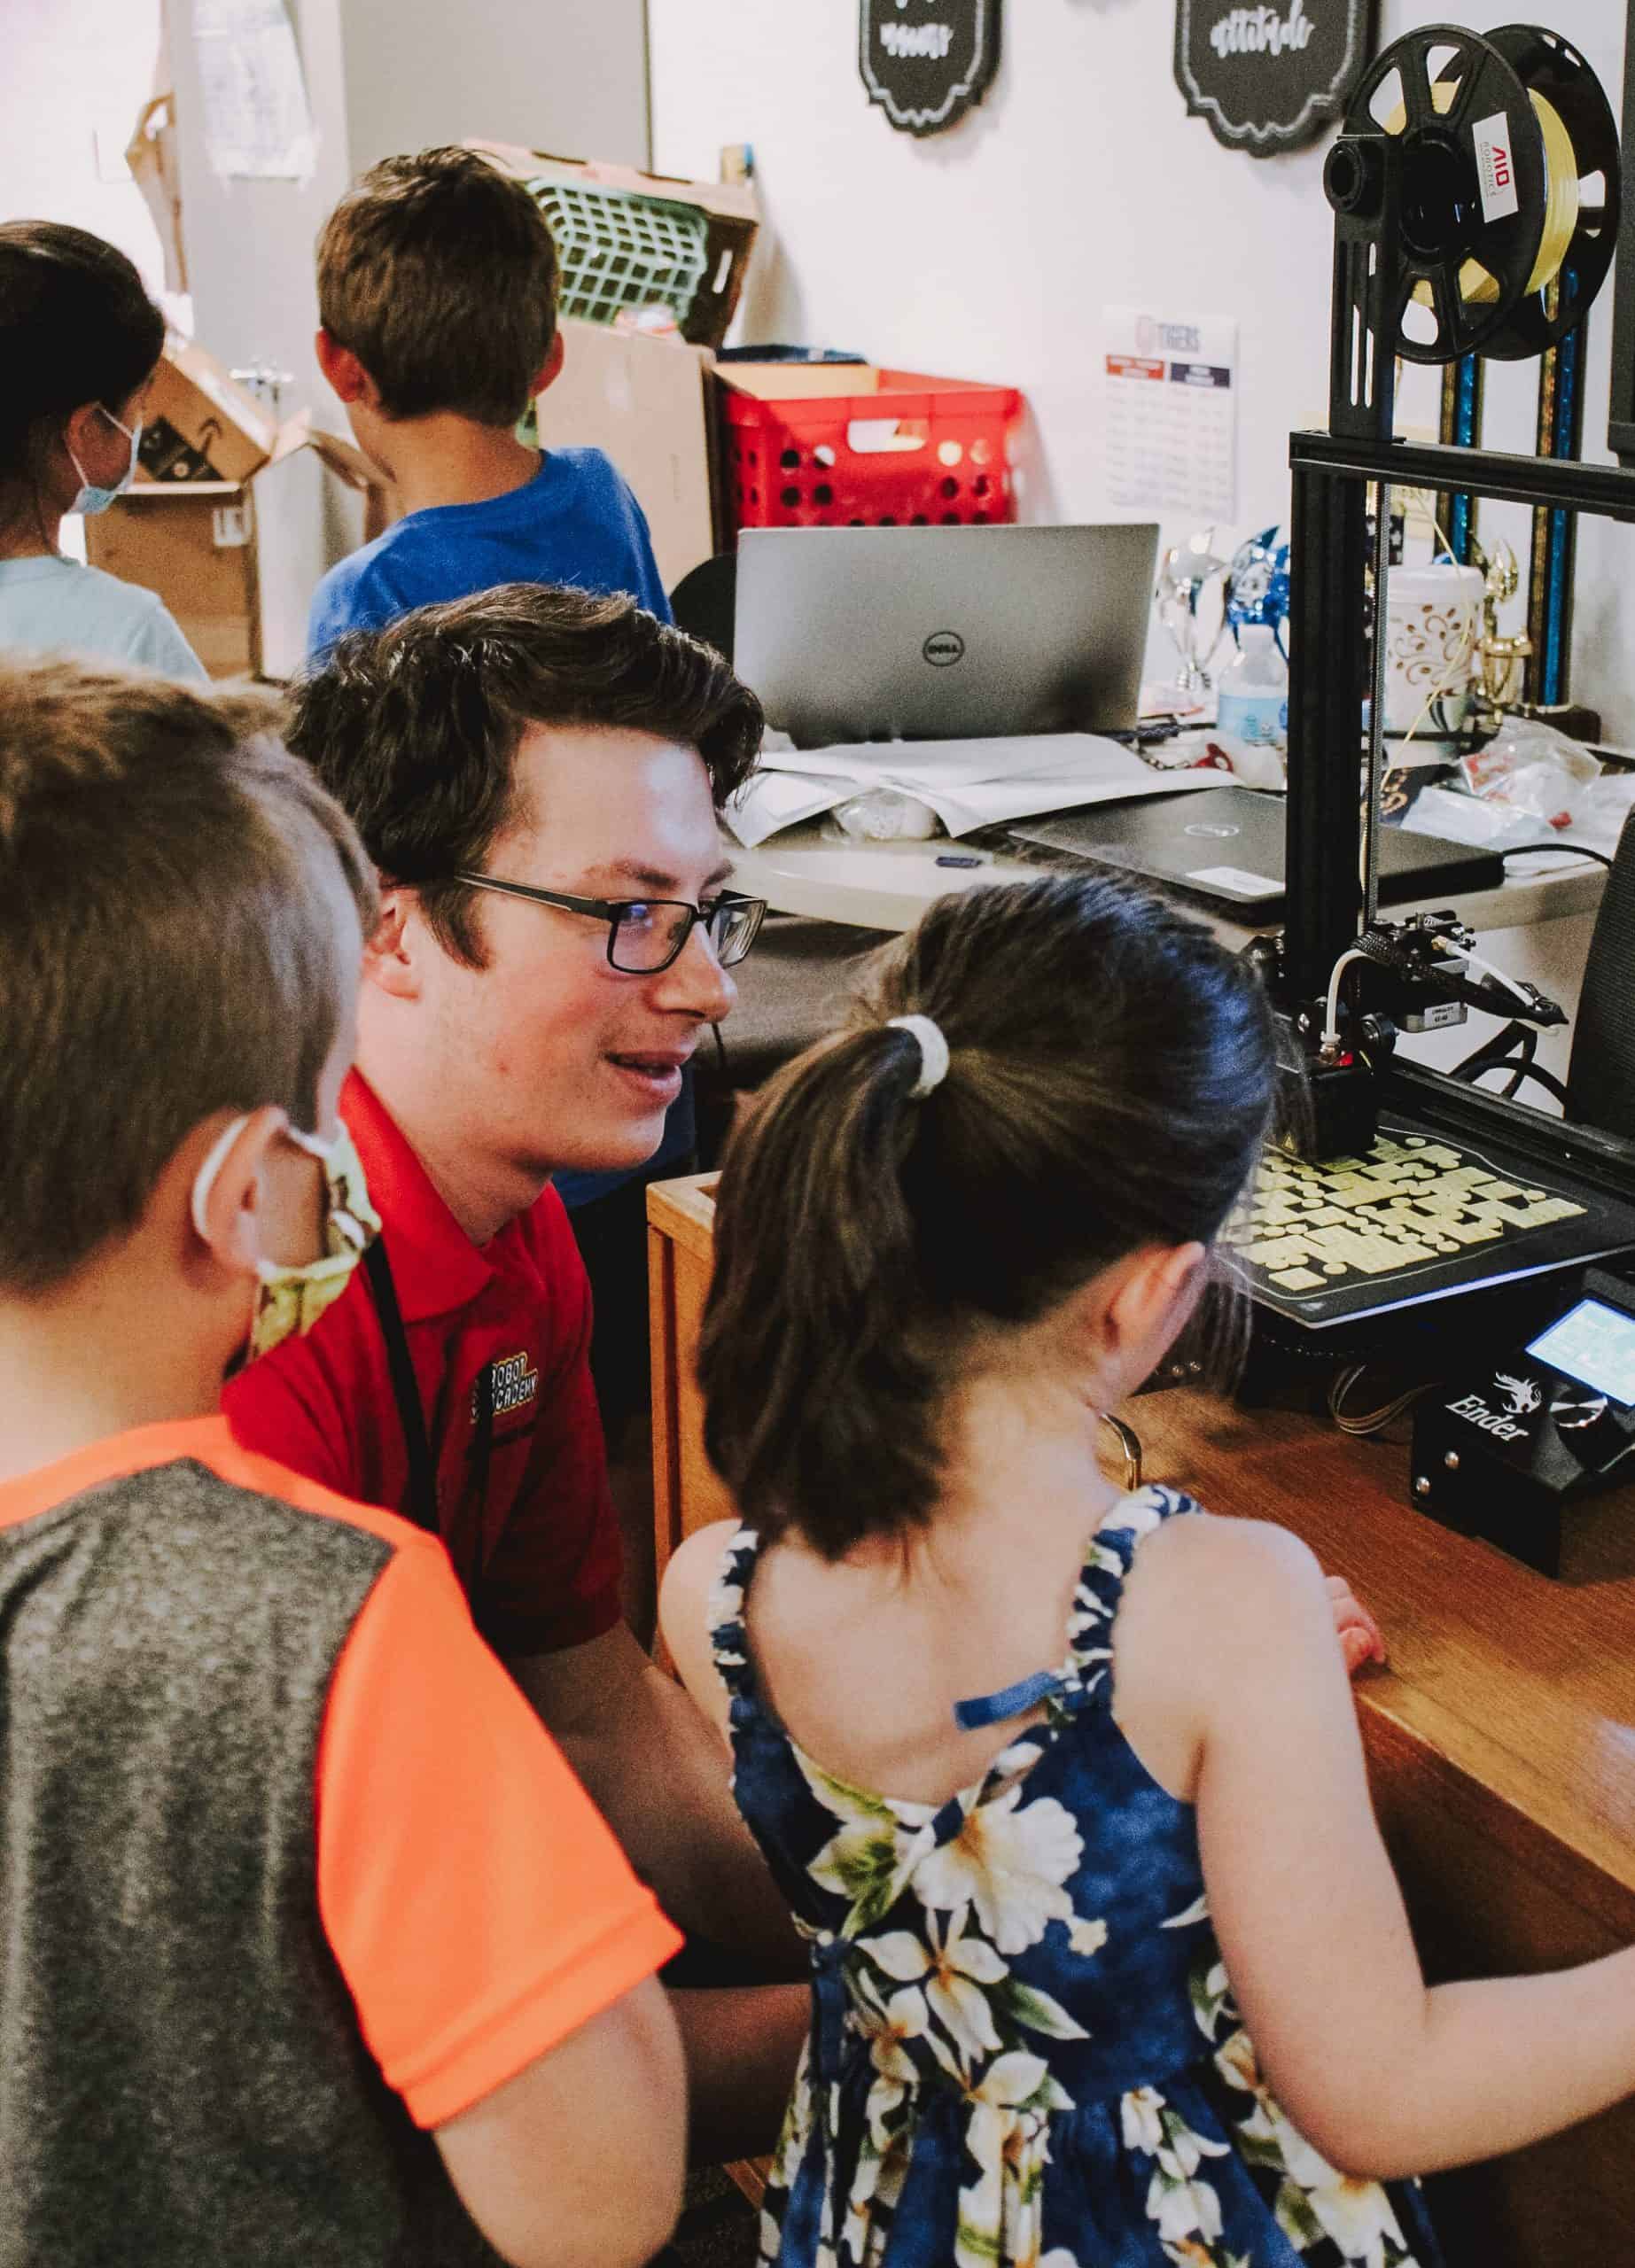 You are currently viewing Sr. LEGO® Robotics & 3D Printing Camp for ages 8 to 13 | Morning with Catered Snack| 4 Days: July 18-21, 2023  |  9 am to 12:30 pm  | Westerville